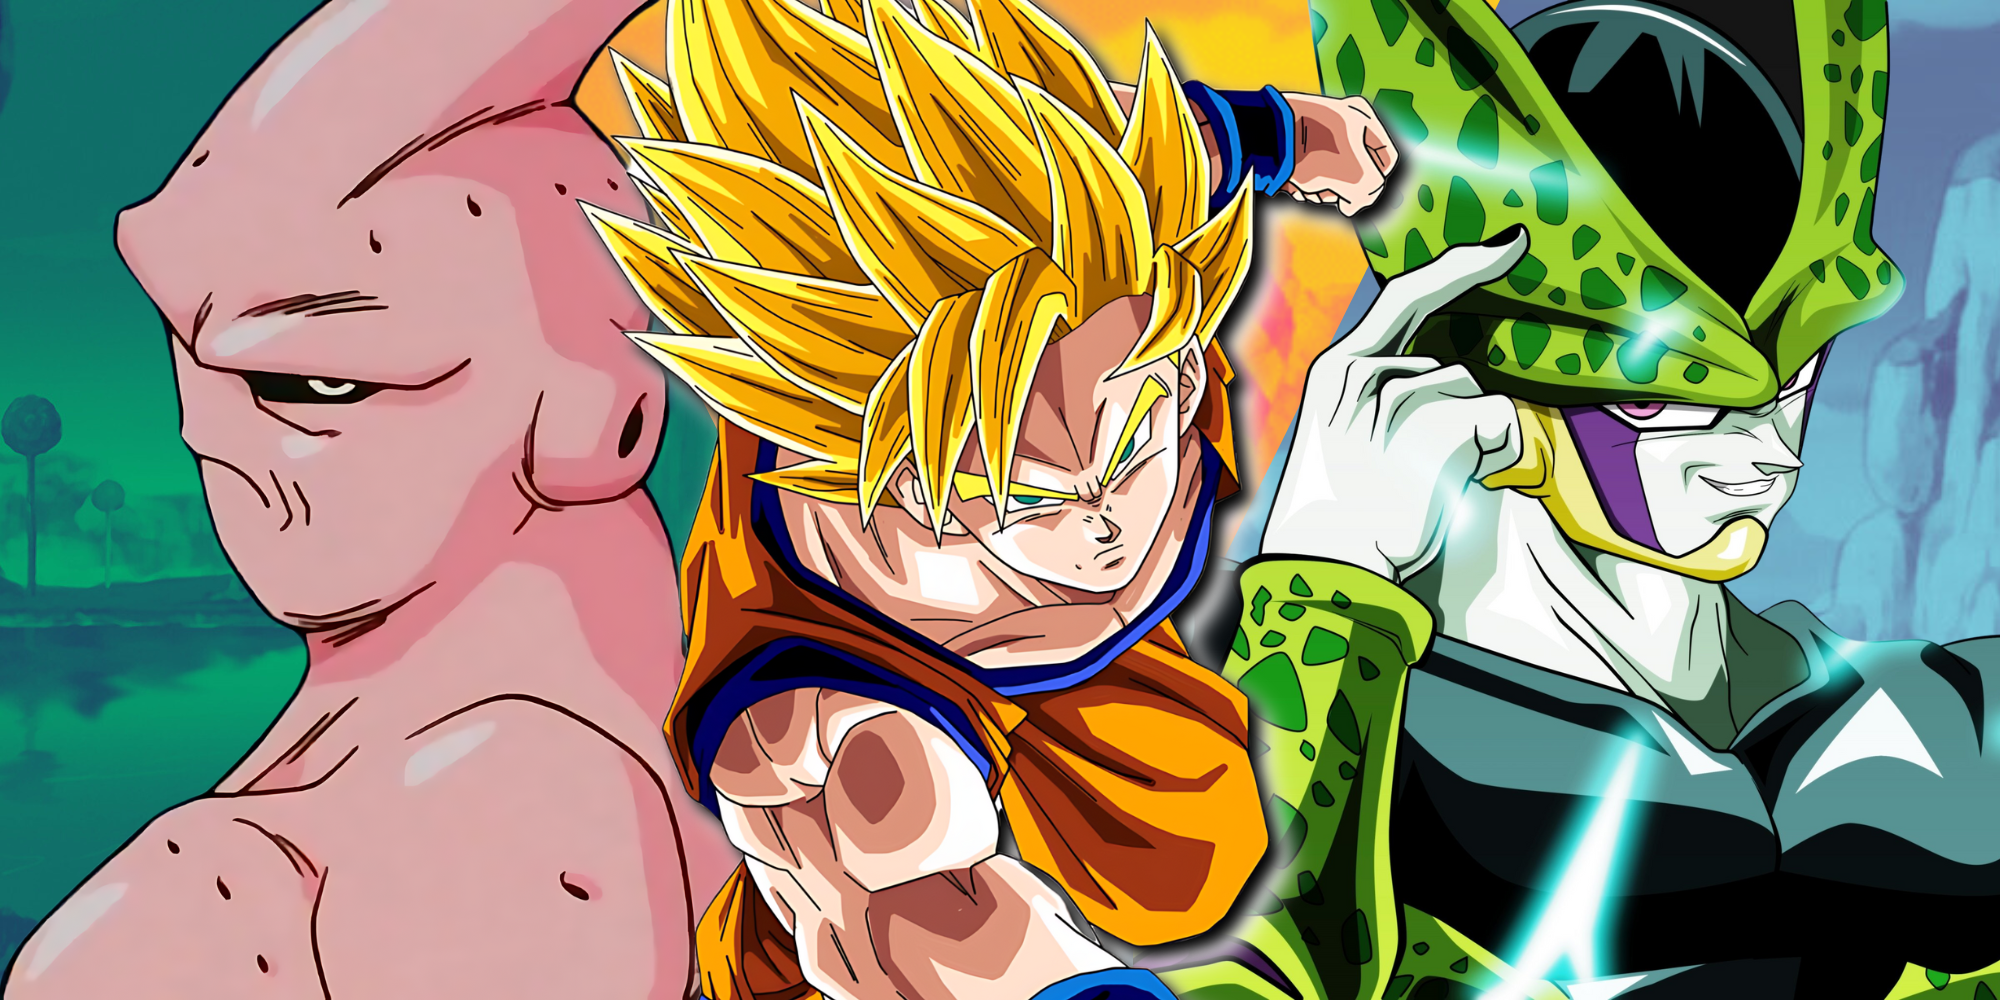 Custom Image of Super Buu, Goku, and Perfect Cell from Dragon Ball Z